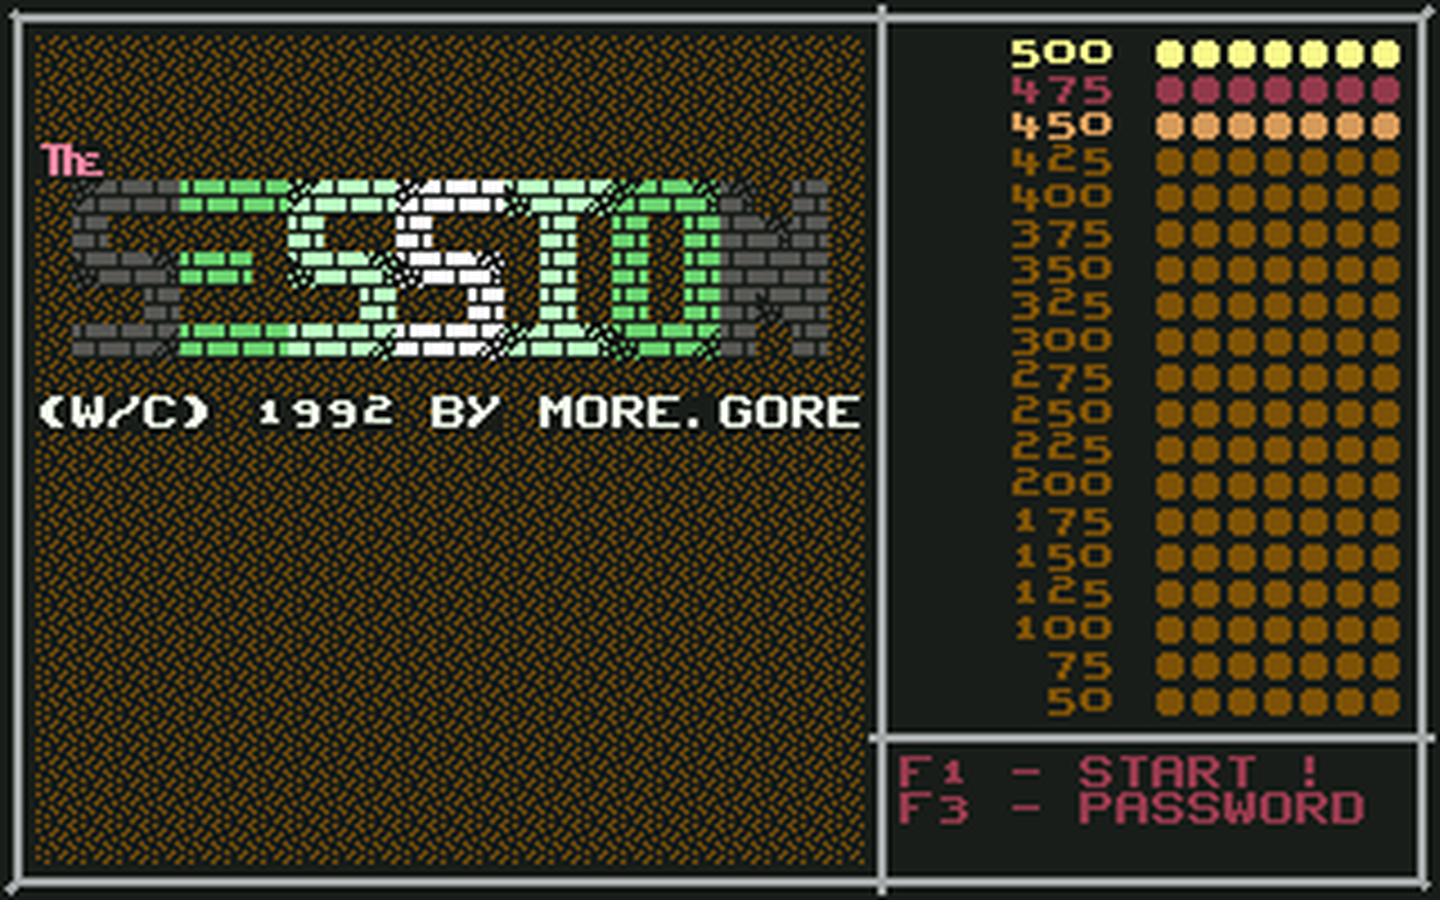 C64 GameBase Session_,_The More.Gore_Software 1992